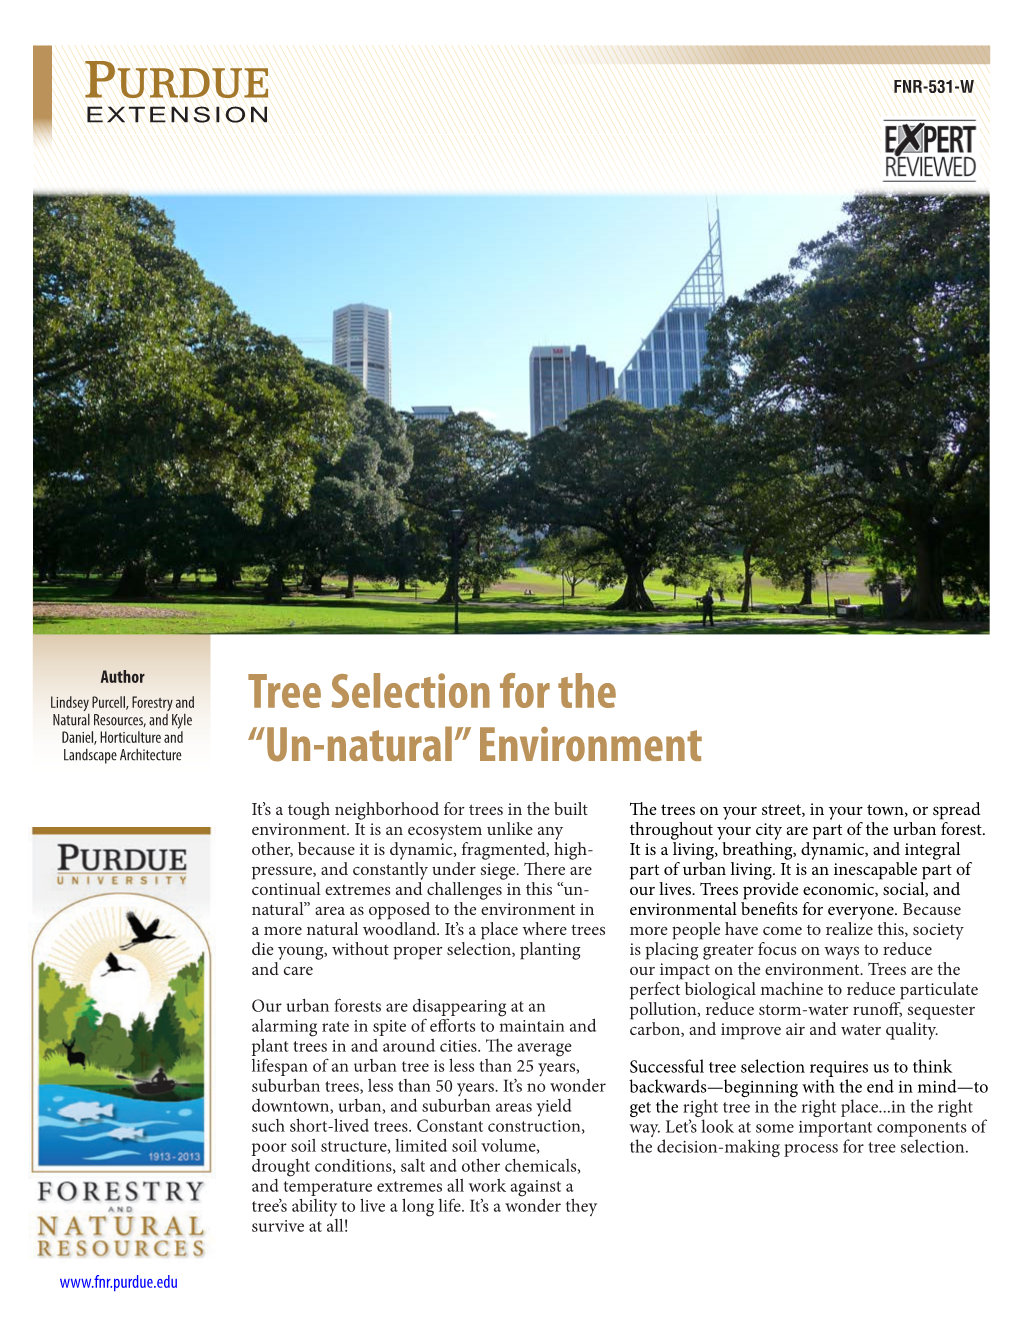 Tree Selection for the “Un-Natural” Environment